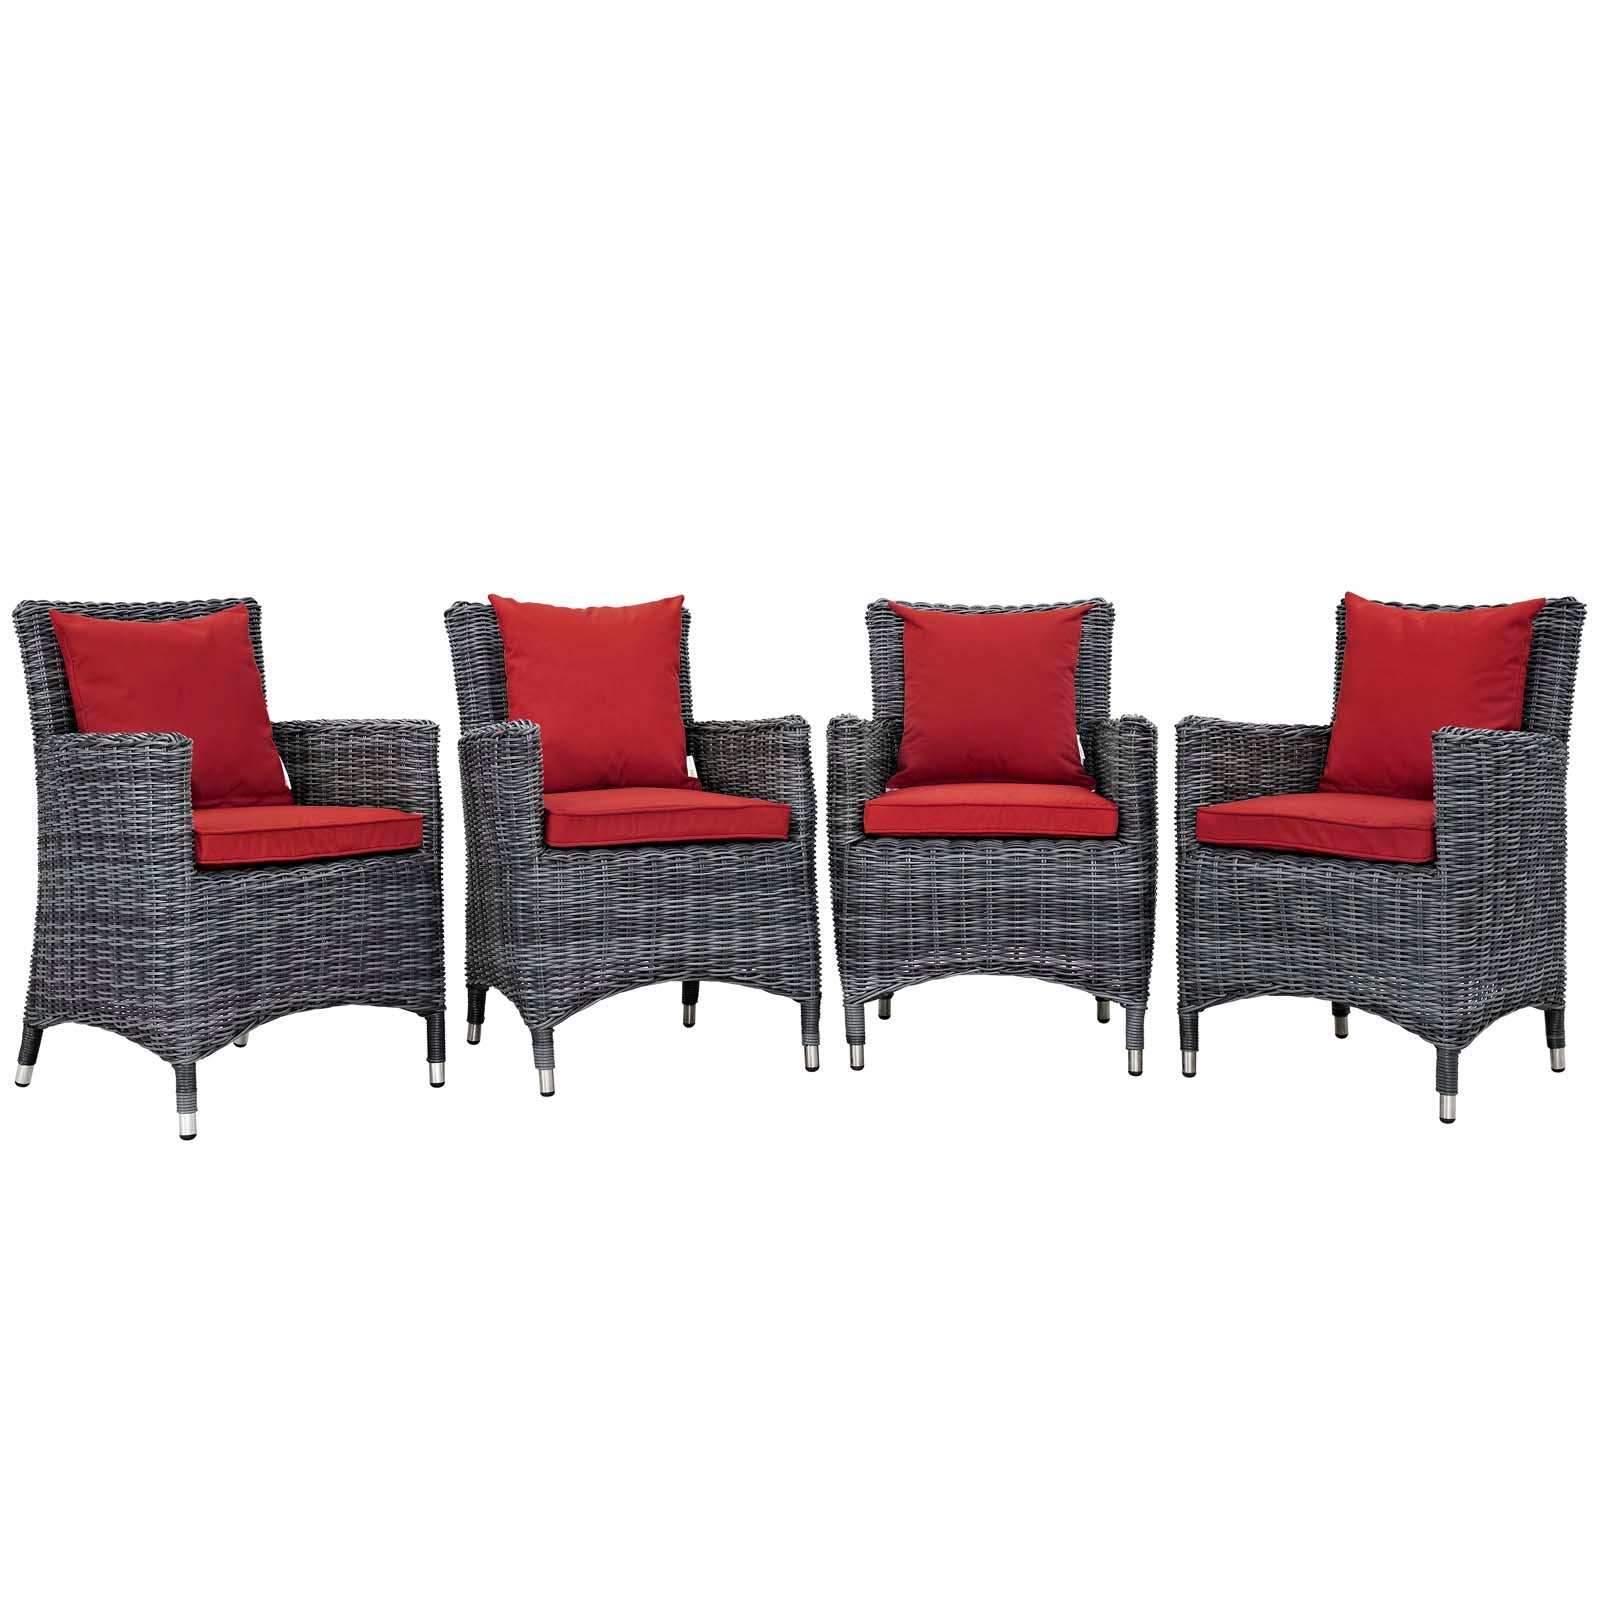 Modway Outdoor Dining Sets - Summon 4 Piece Outdoor Patio Sunbrella Dining Set Canvas Red